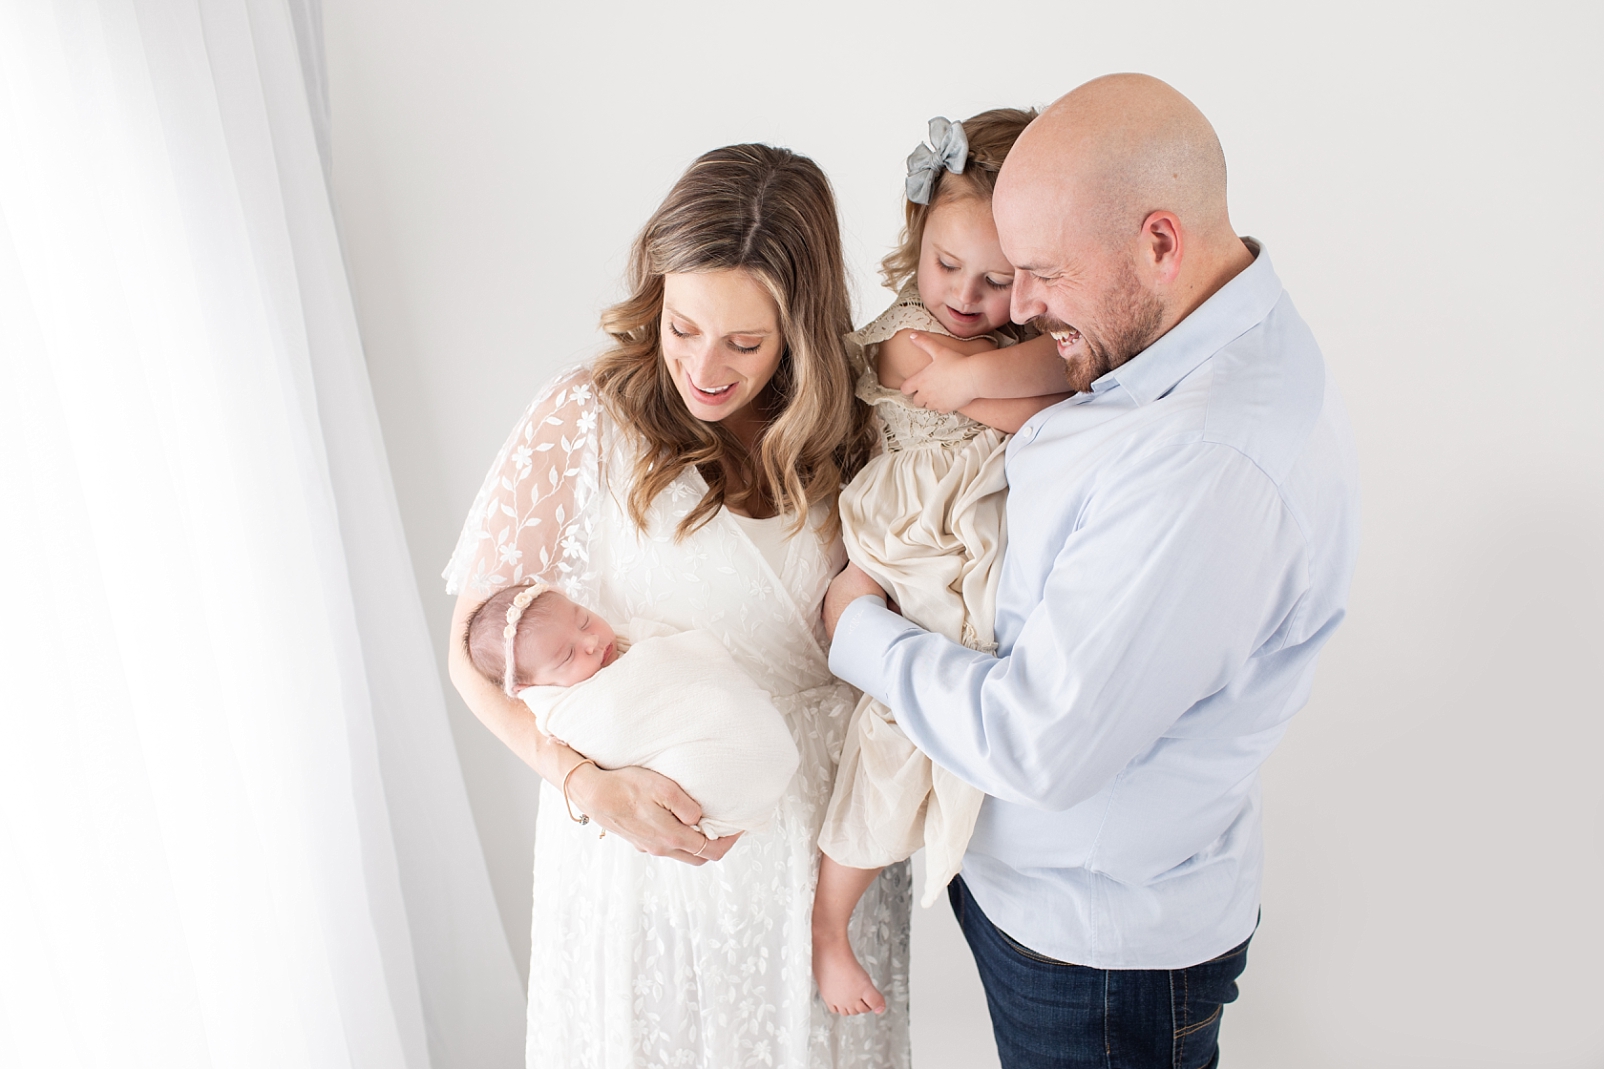 A mom, dad, sister and baby standing near bright white curtains | Ellicott City Newborn Photographer